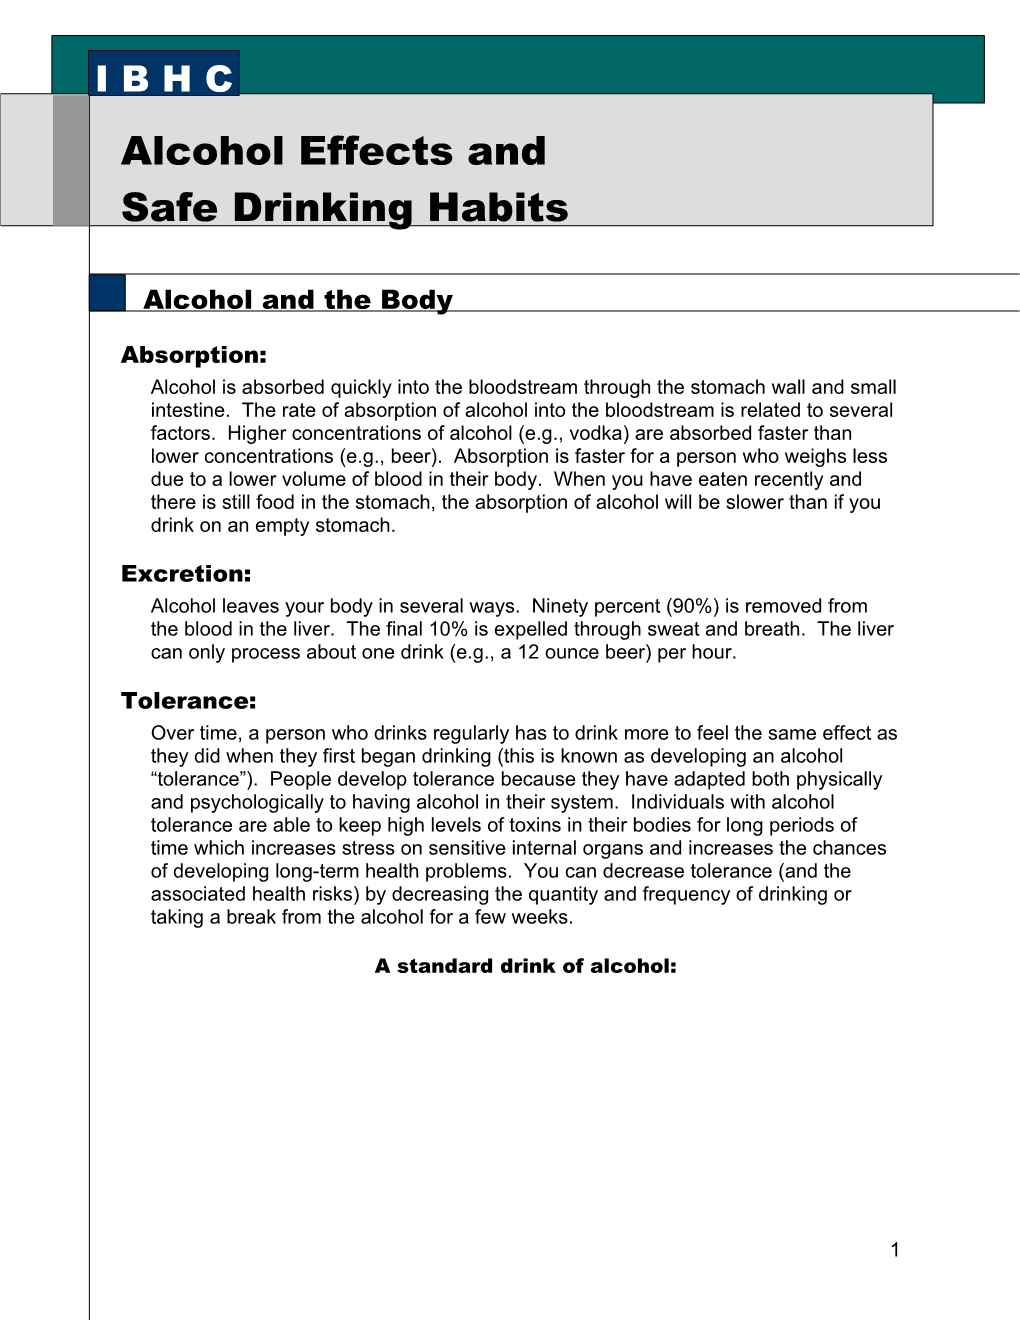 Alcohol Affects and Safe Drinking Habits